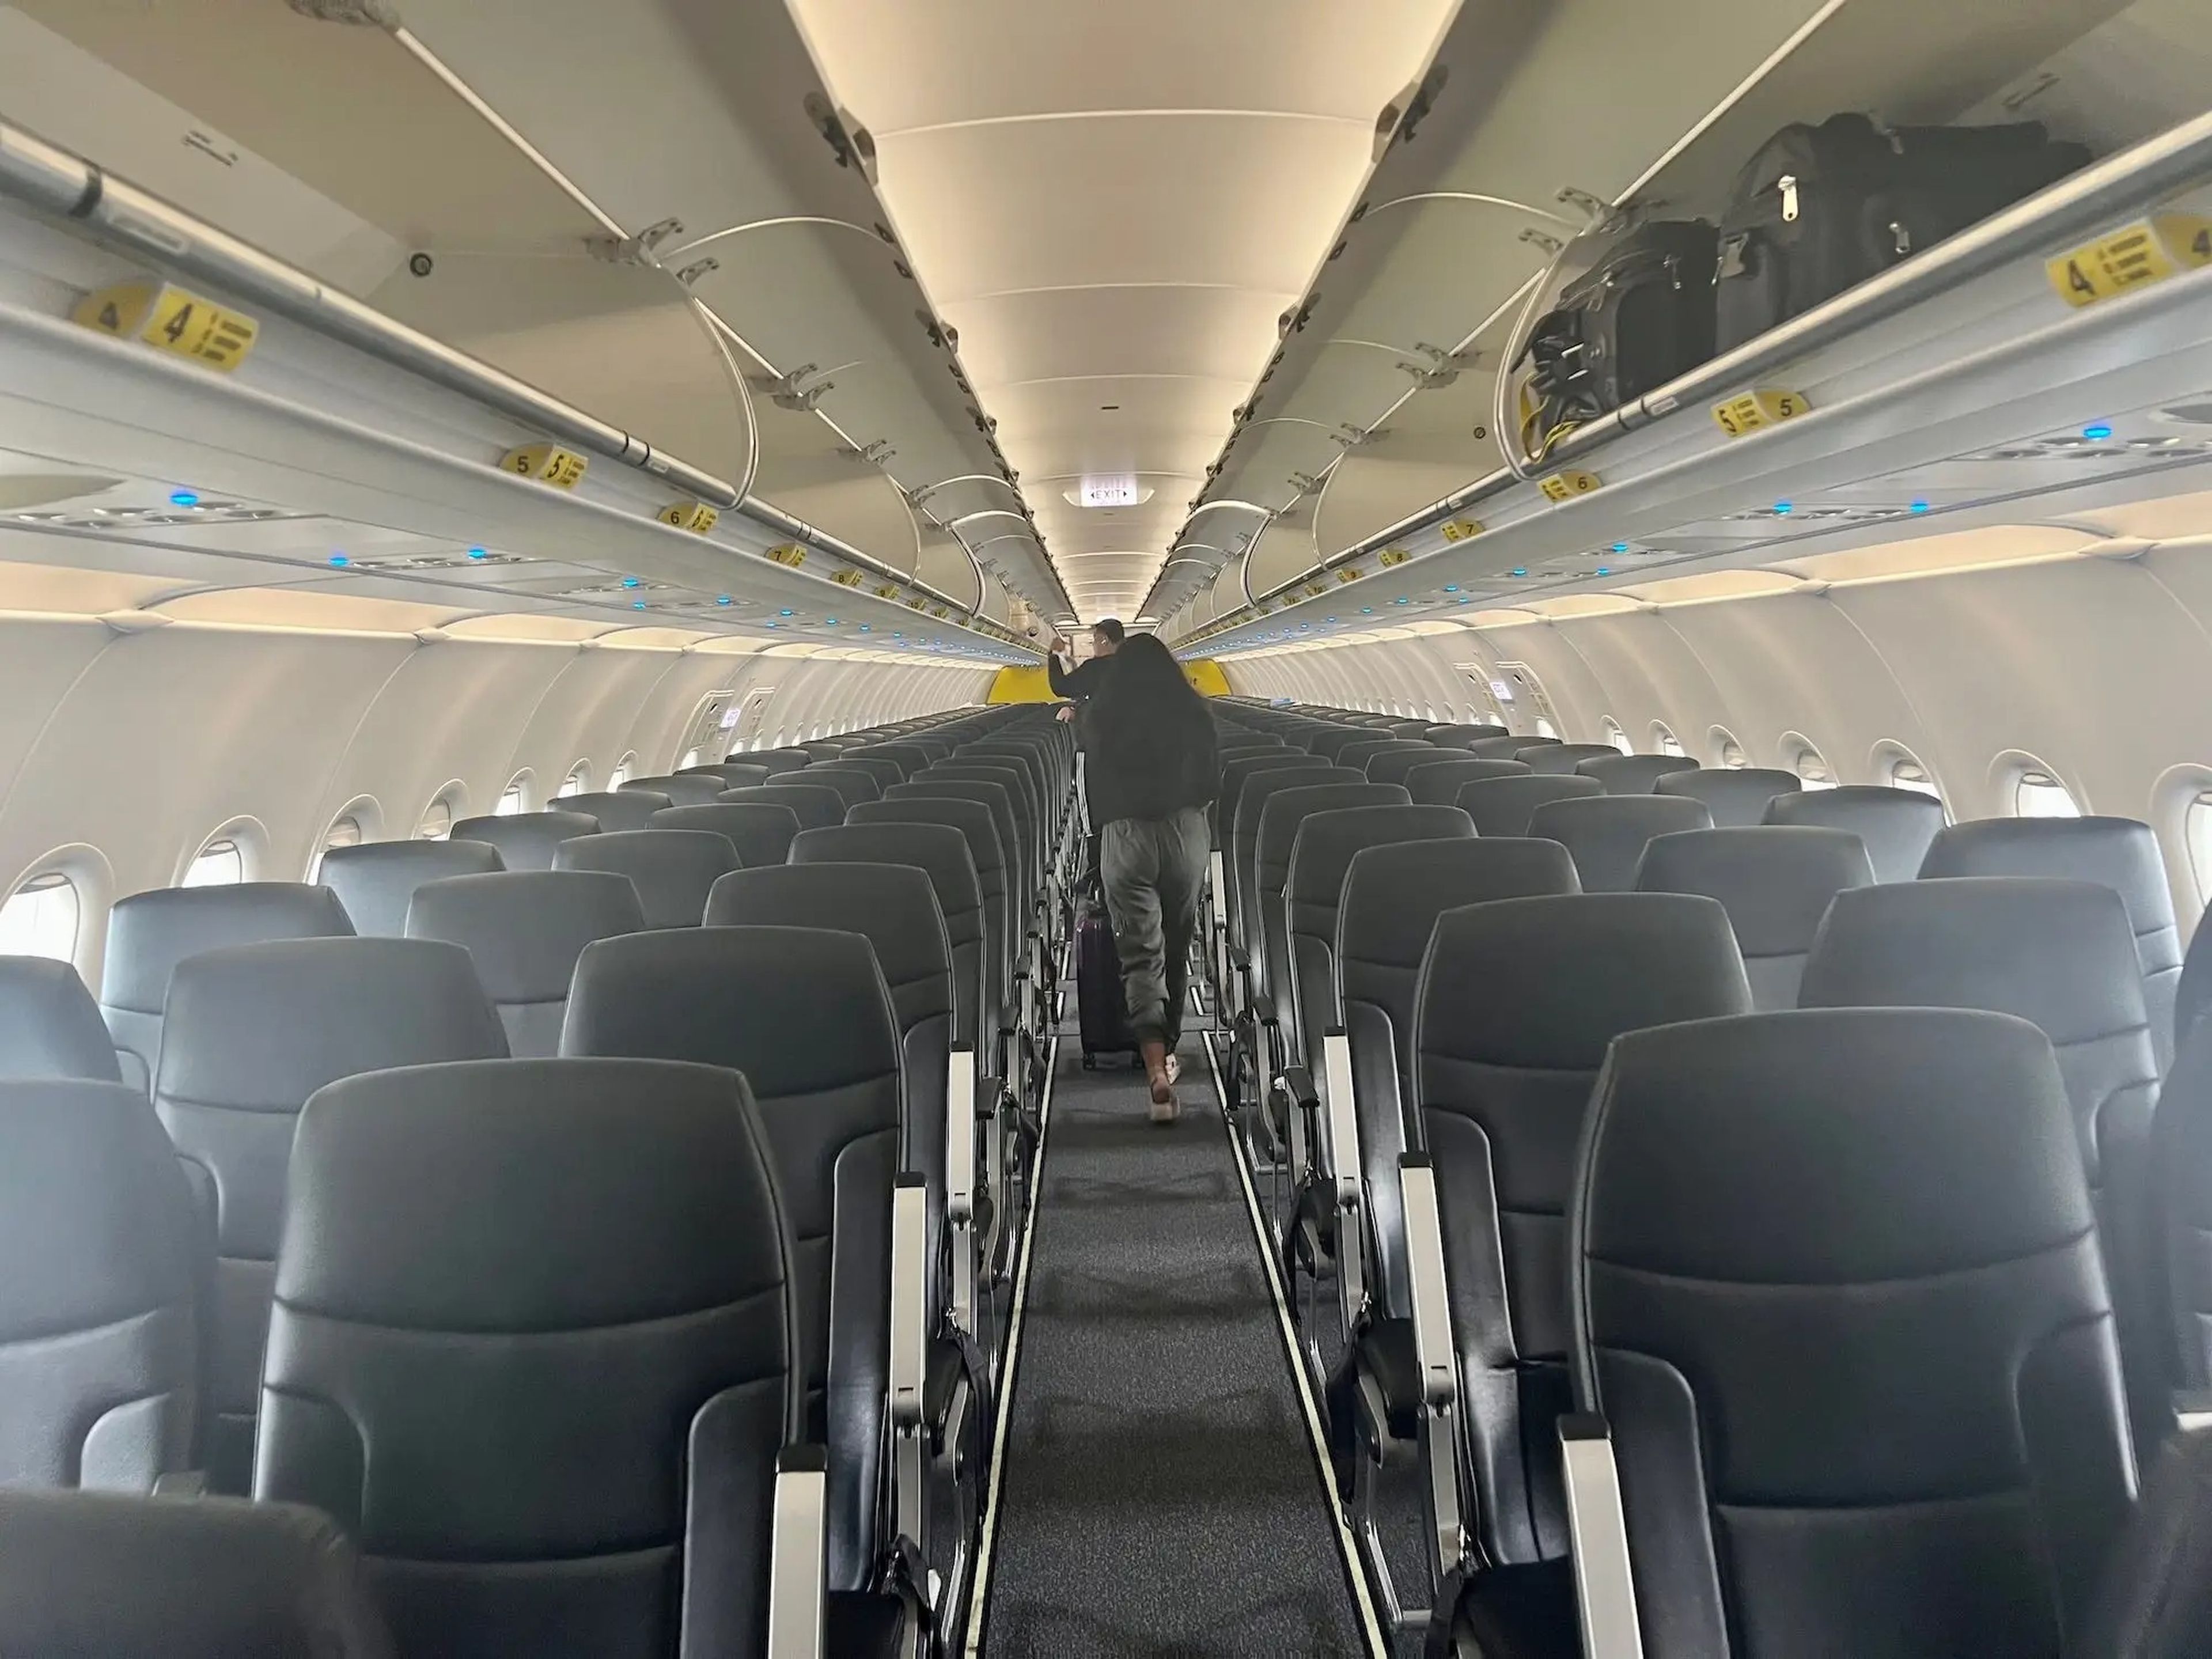 Rows of passenger seats in the interior of Spirit plane.